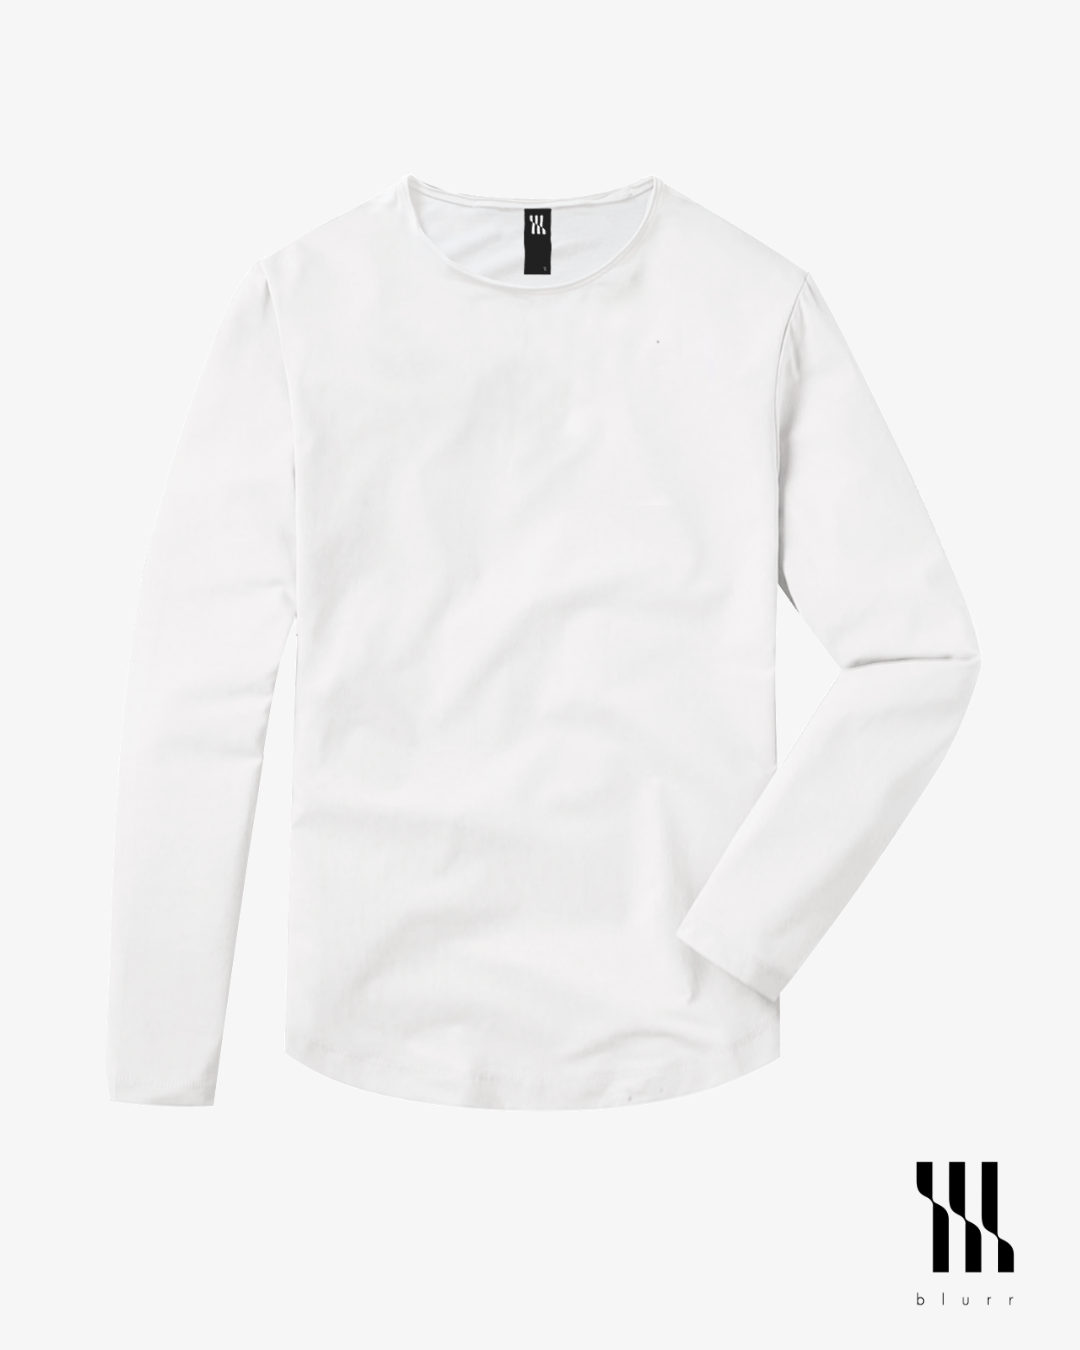 White T-shirt - Long Sleeve Wide Neck Curved Bottom